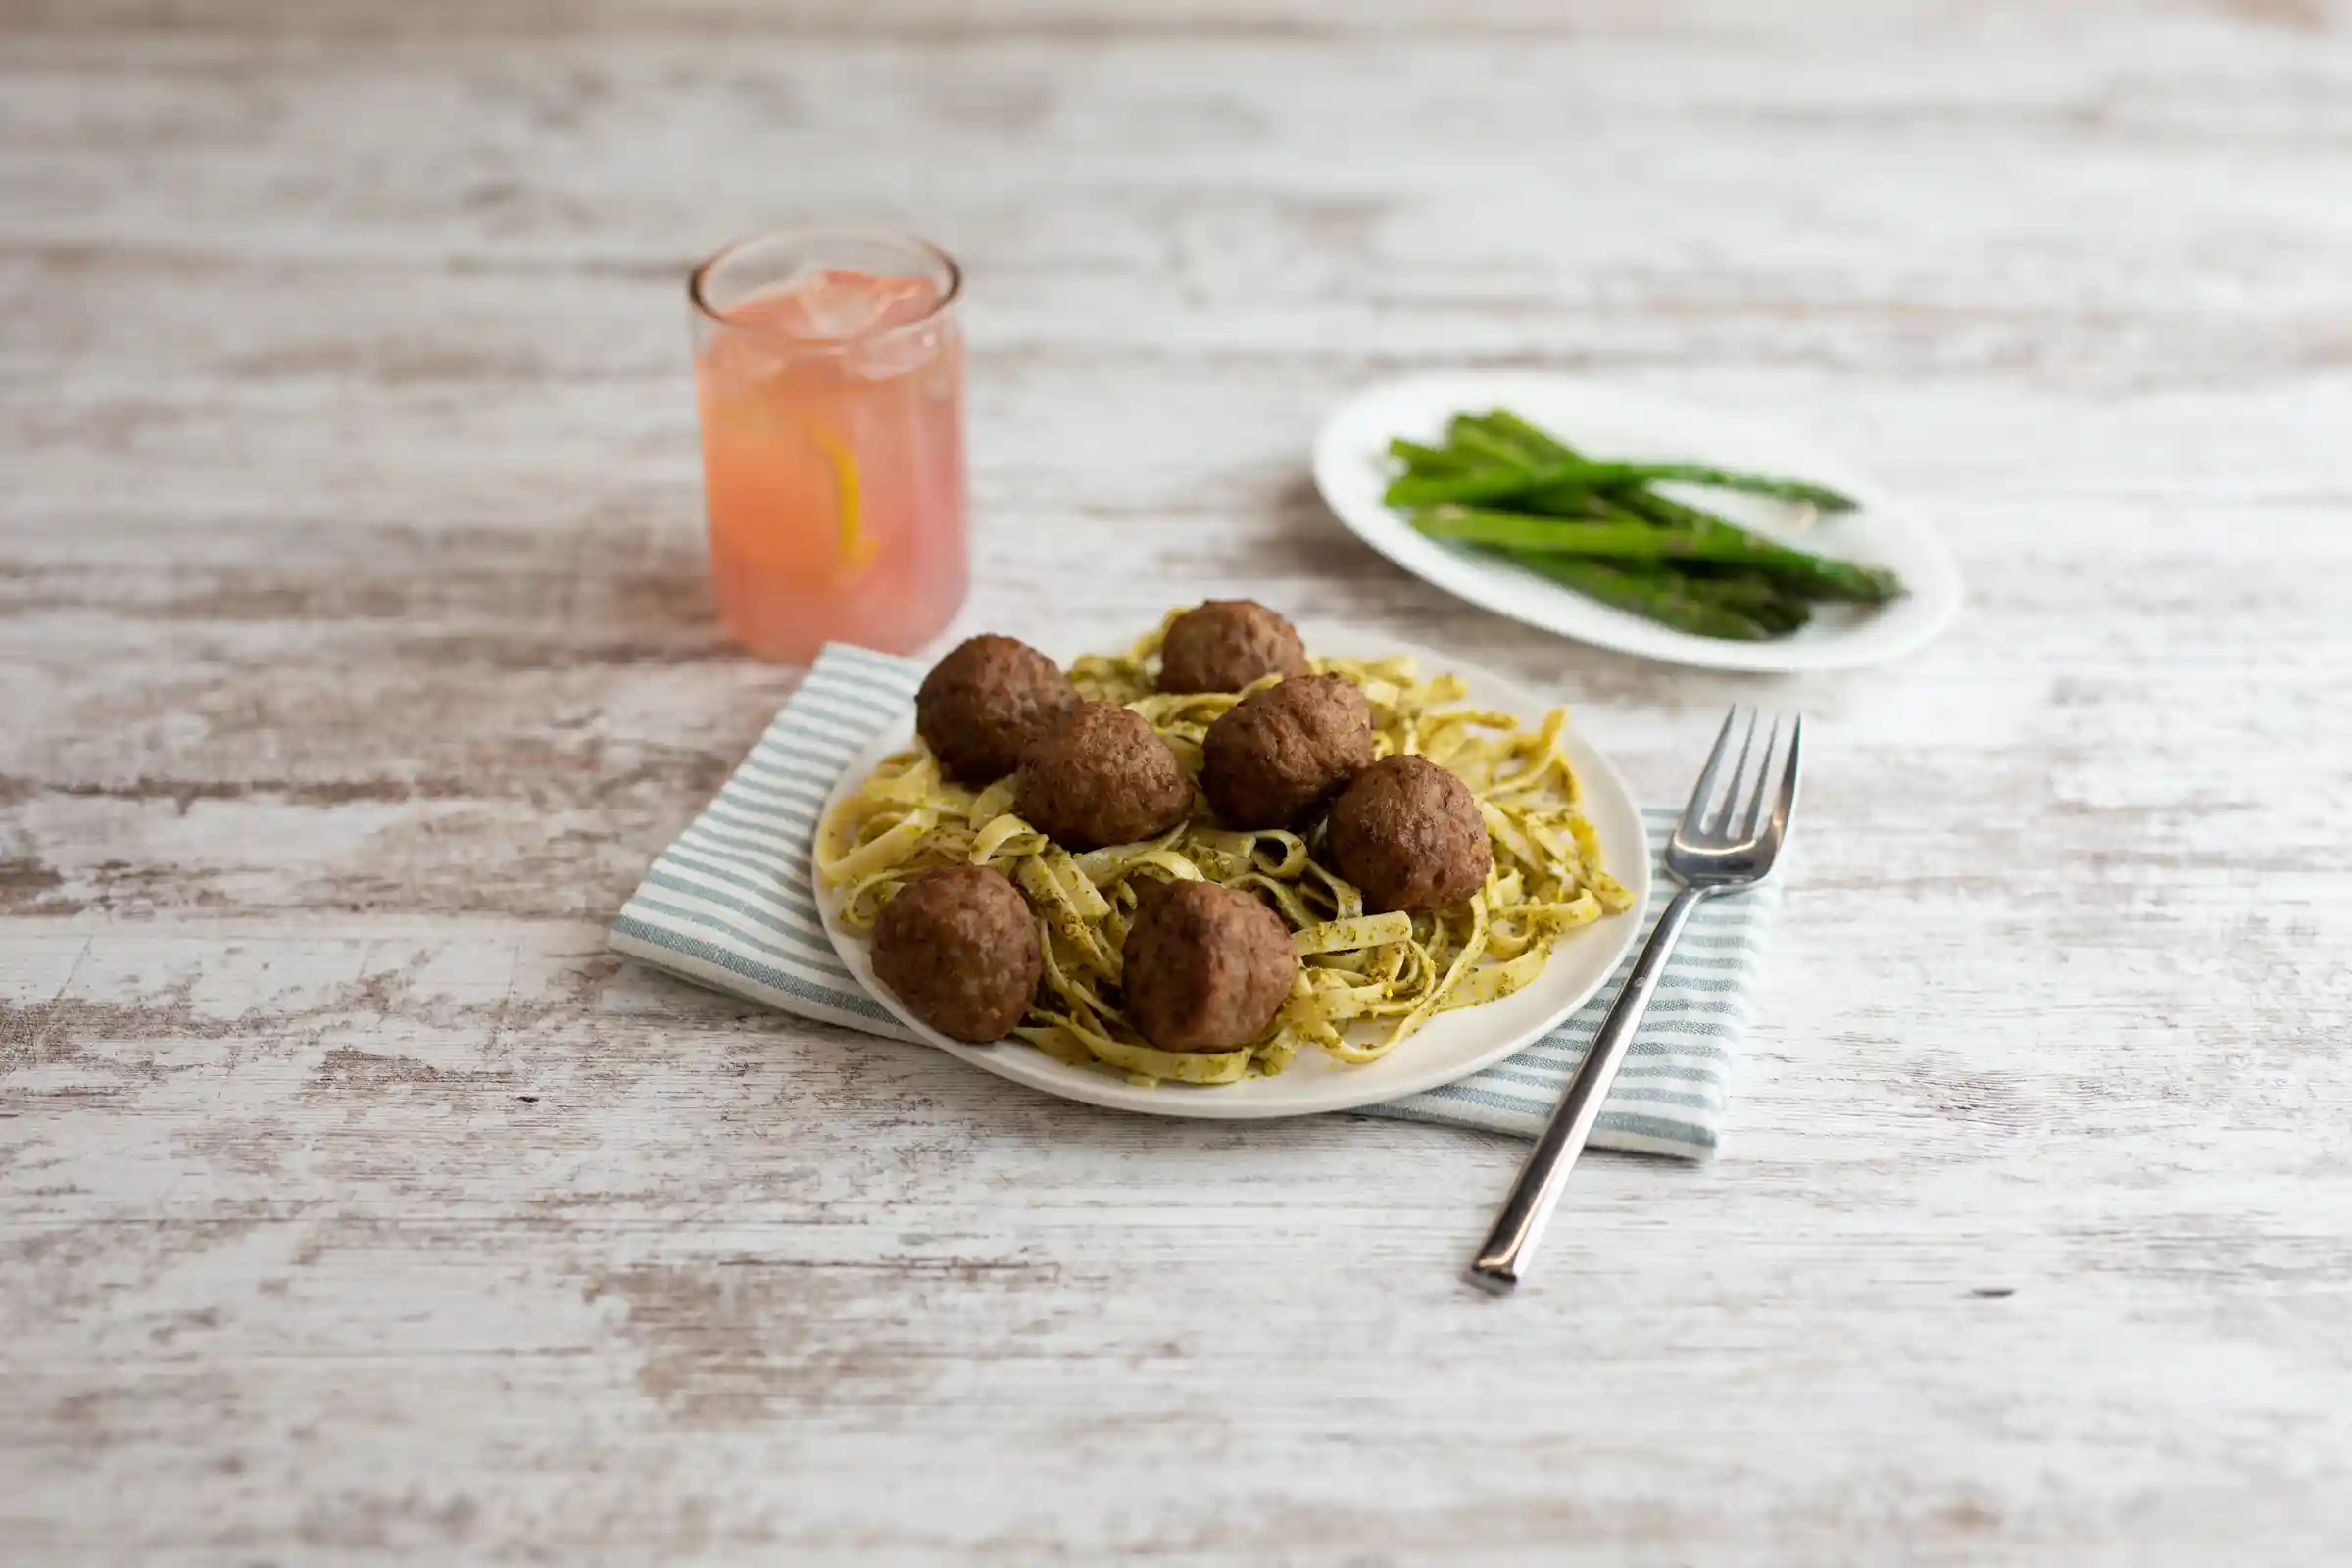 Bonici® Fully Cooked Oven Roasted Italian Style Pork and Beef Meatballs, .5 ozhttps://images.salsify.com/image/upload/s--0r-IJVq7--/q_25/xo8jgtyjy79w9muv24zr.webp